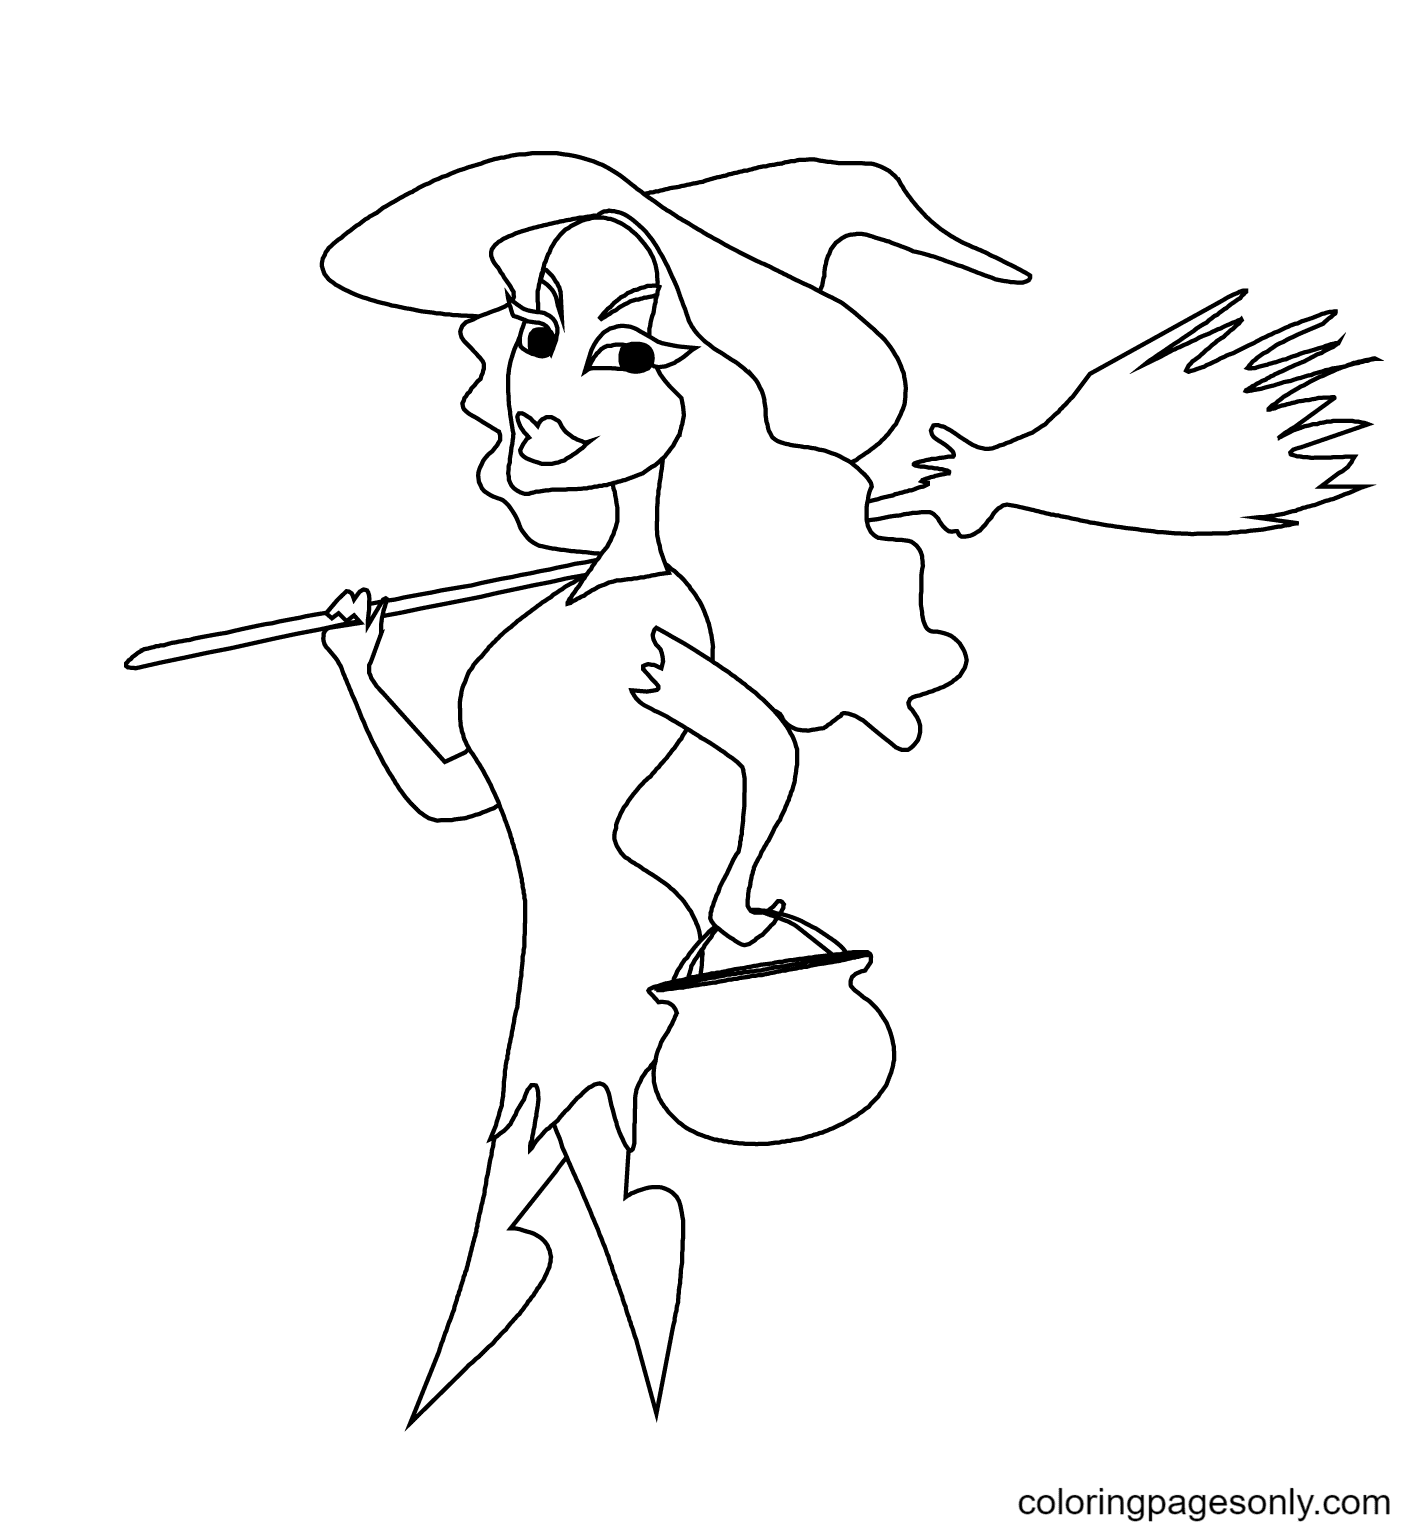 Witch with Broomstick and Cauldron Coloring Page